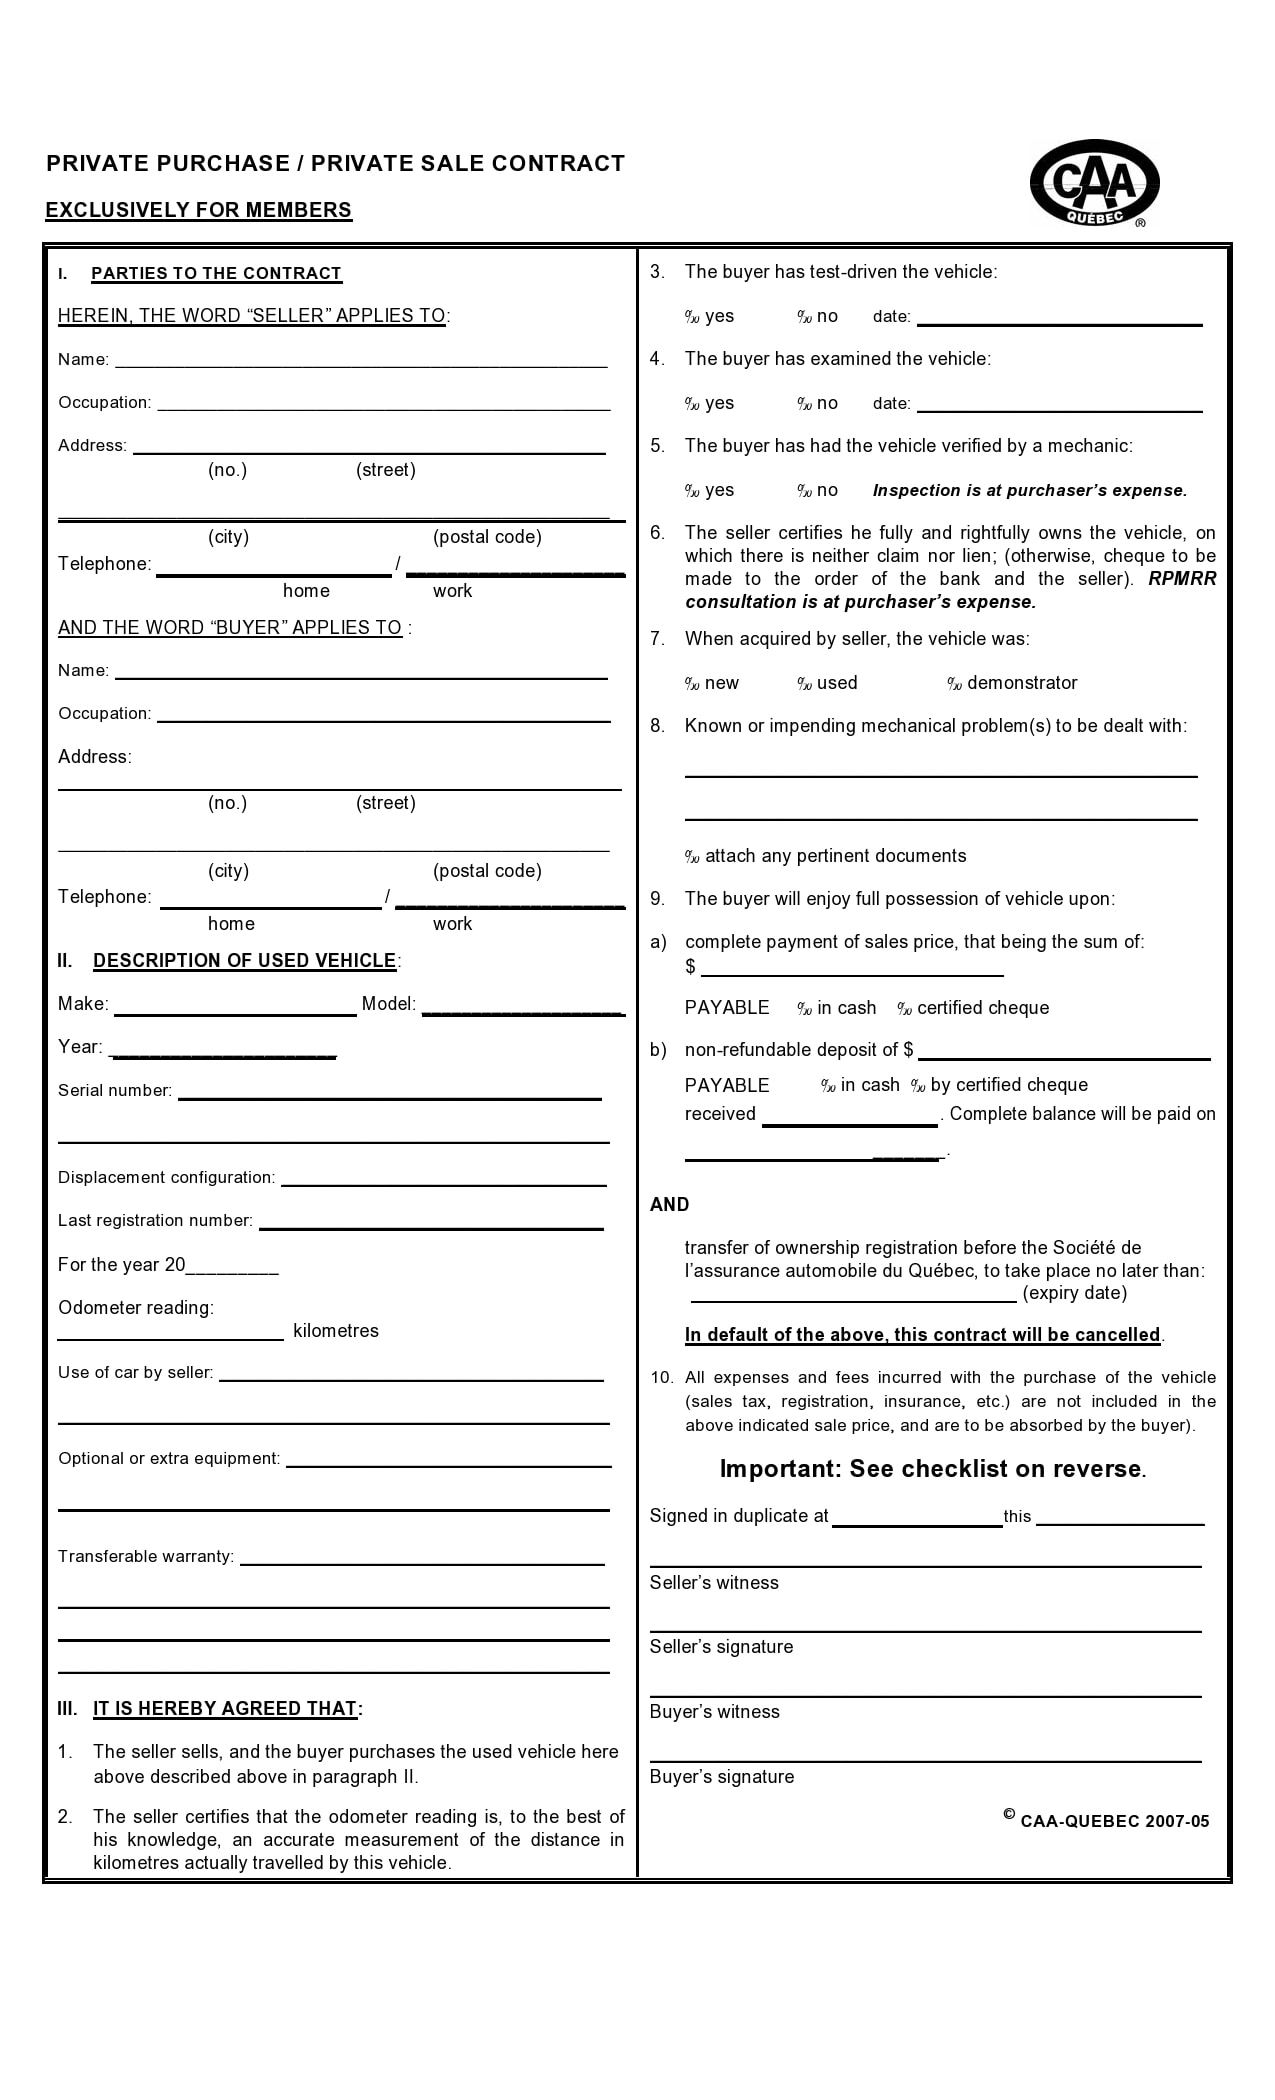 sample-car-sale-agreement-form-is-shown